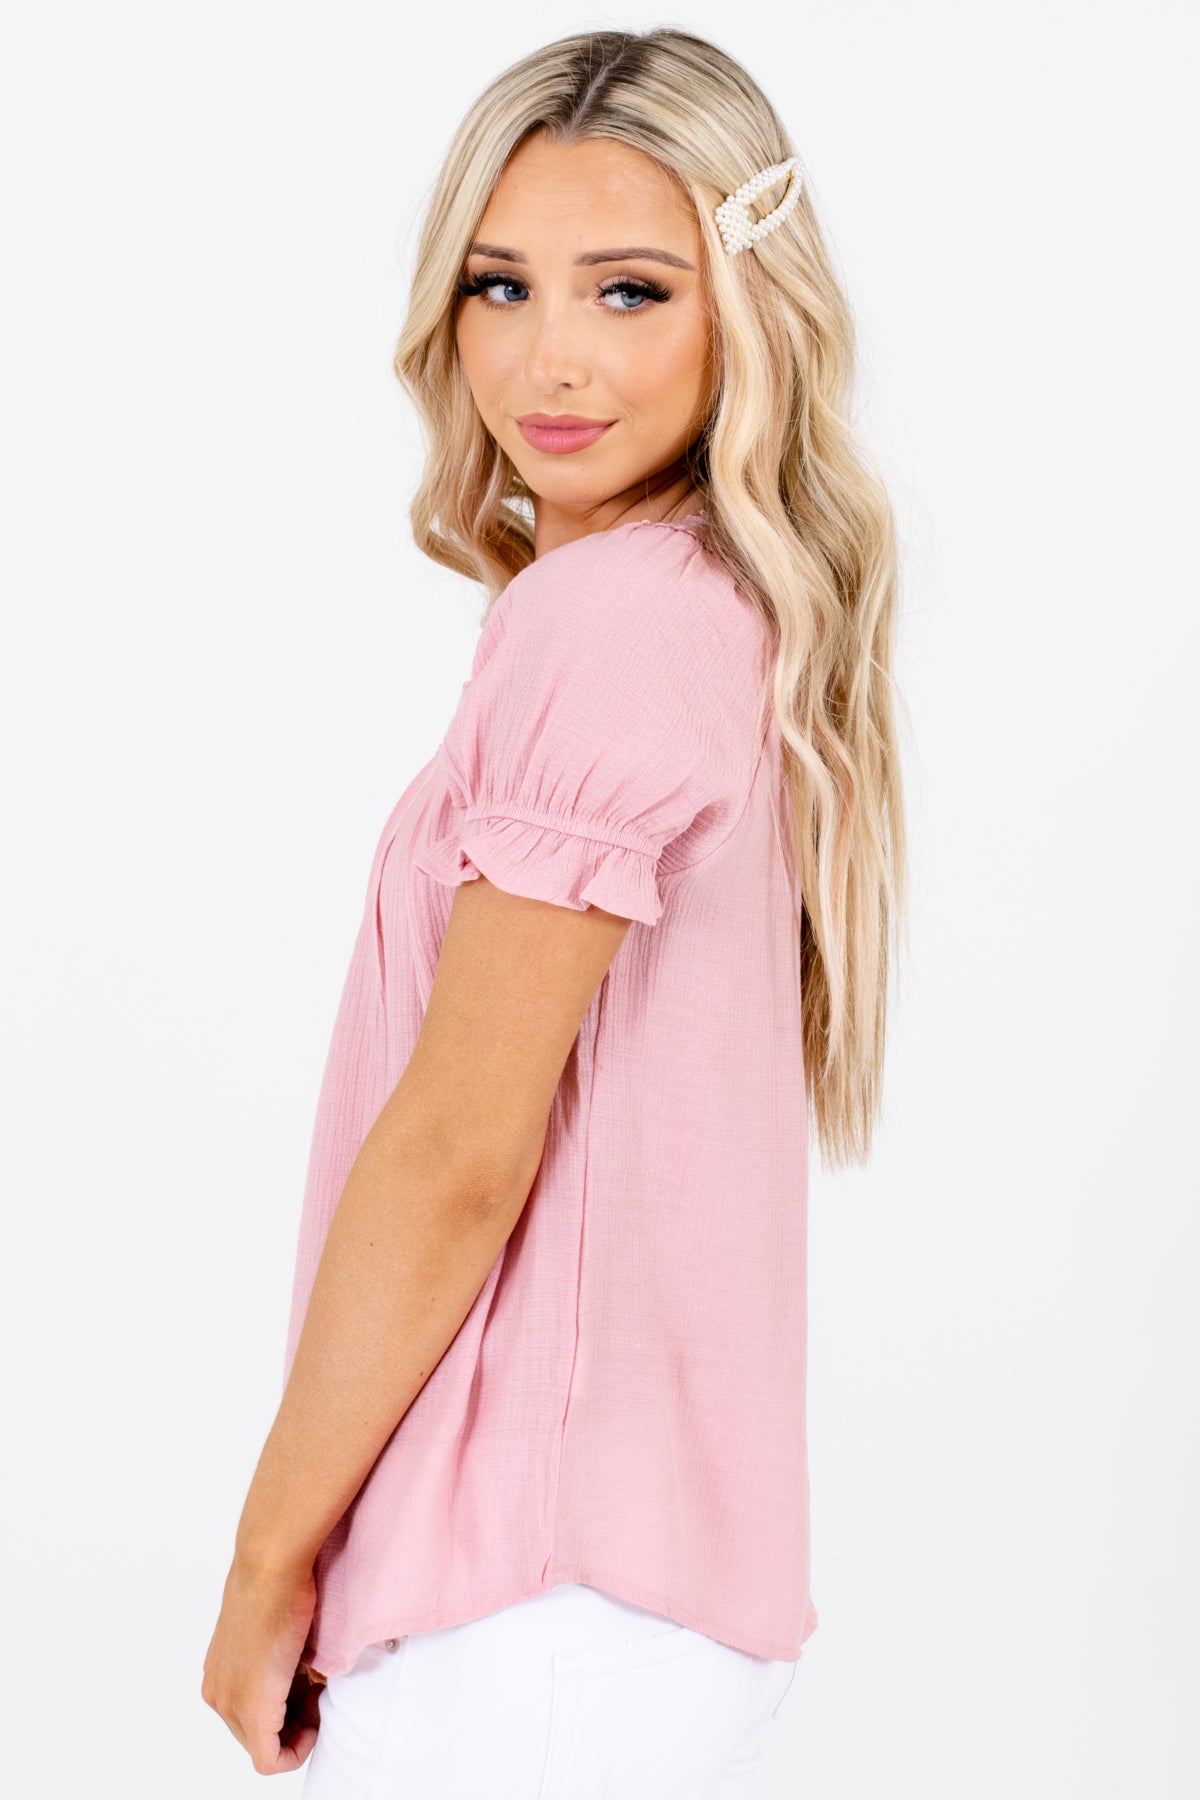 Women's Pink Business Casual Boutique Blouse